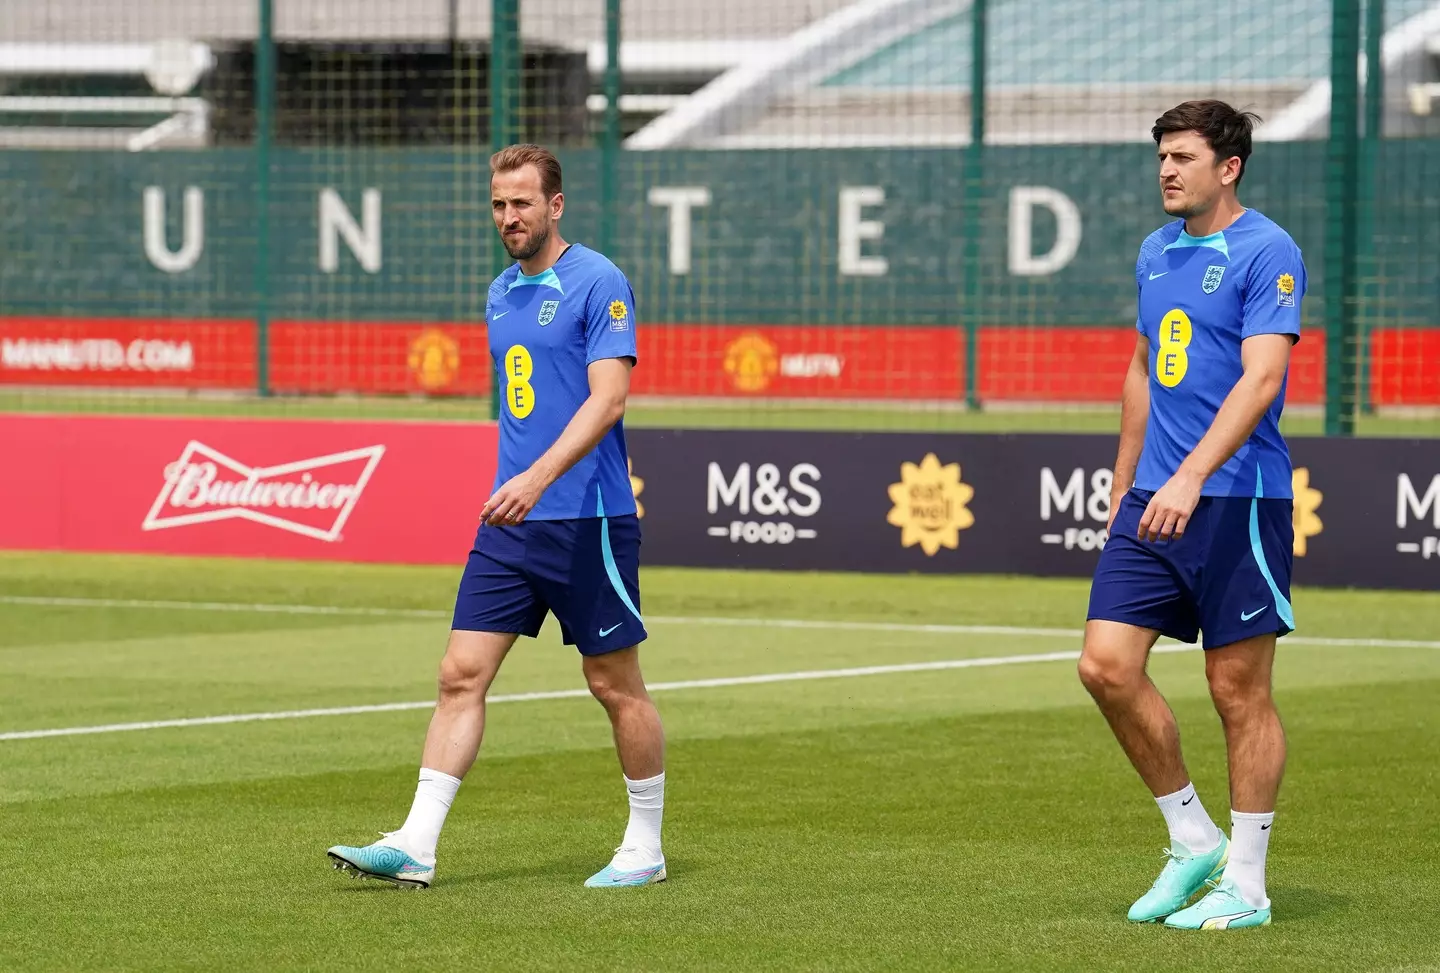 Kane with United defender Harry Maguire. Image: Alamy